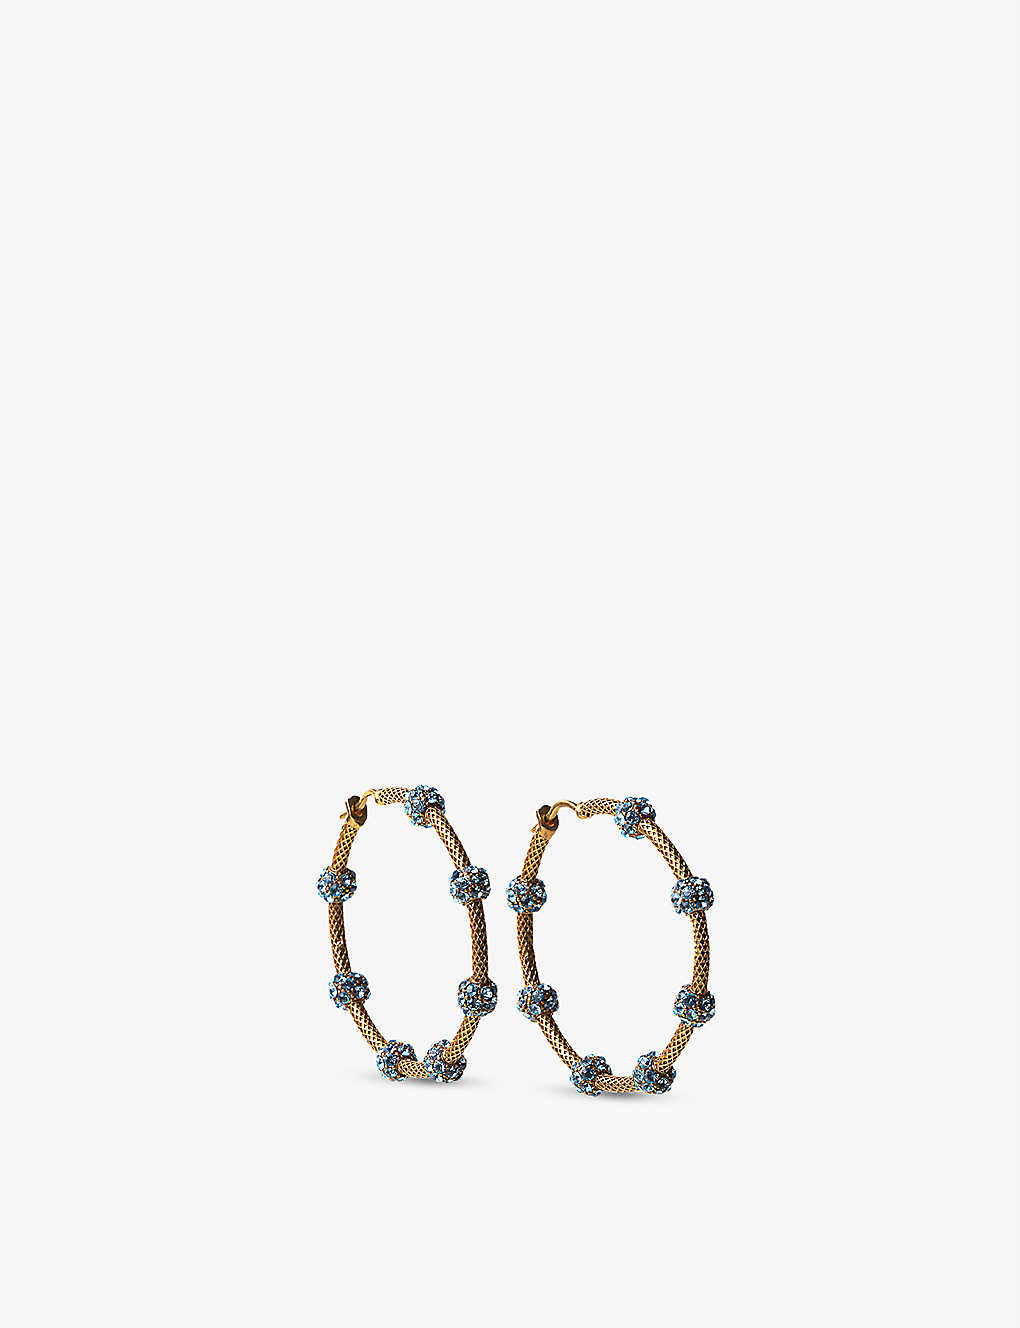 La Maison Couture Sonia Petroff Aquamarine Reef 24ct Yellow-gold Plated Brass And Swarovski Crystals Hoop Earrings